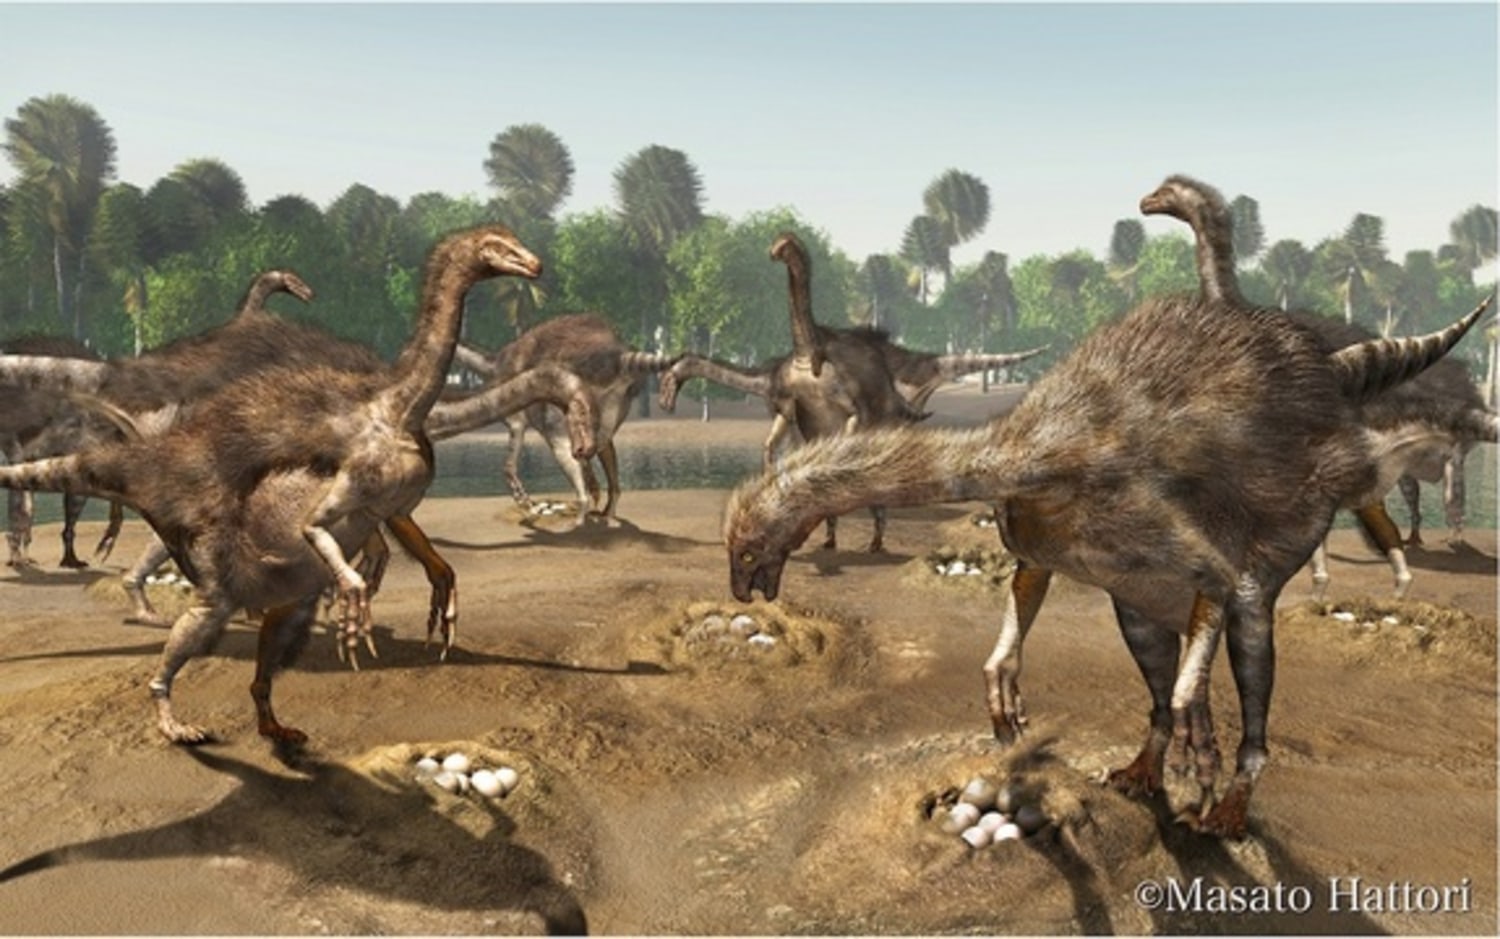 Nests of bizarre big-clawed dinosaurs unearthed in Mongolia